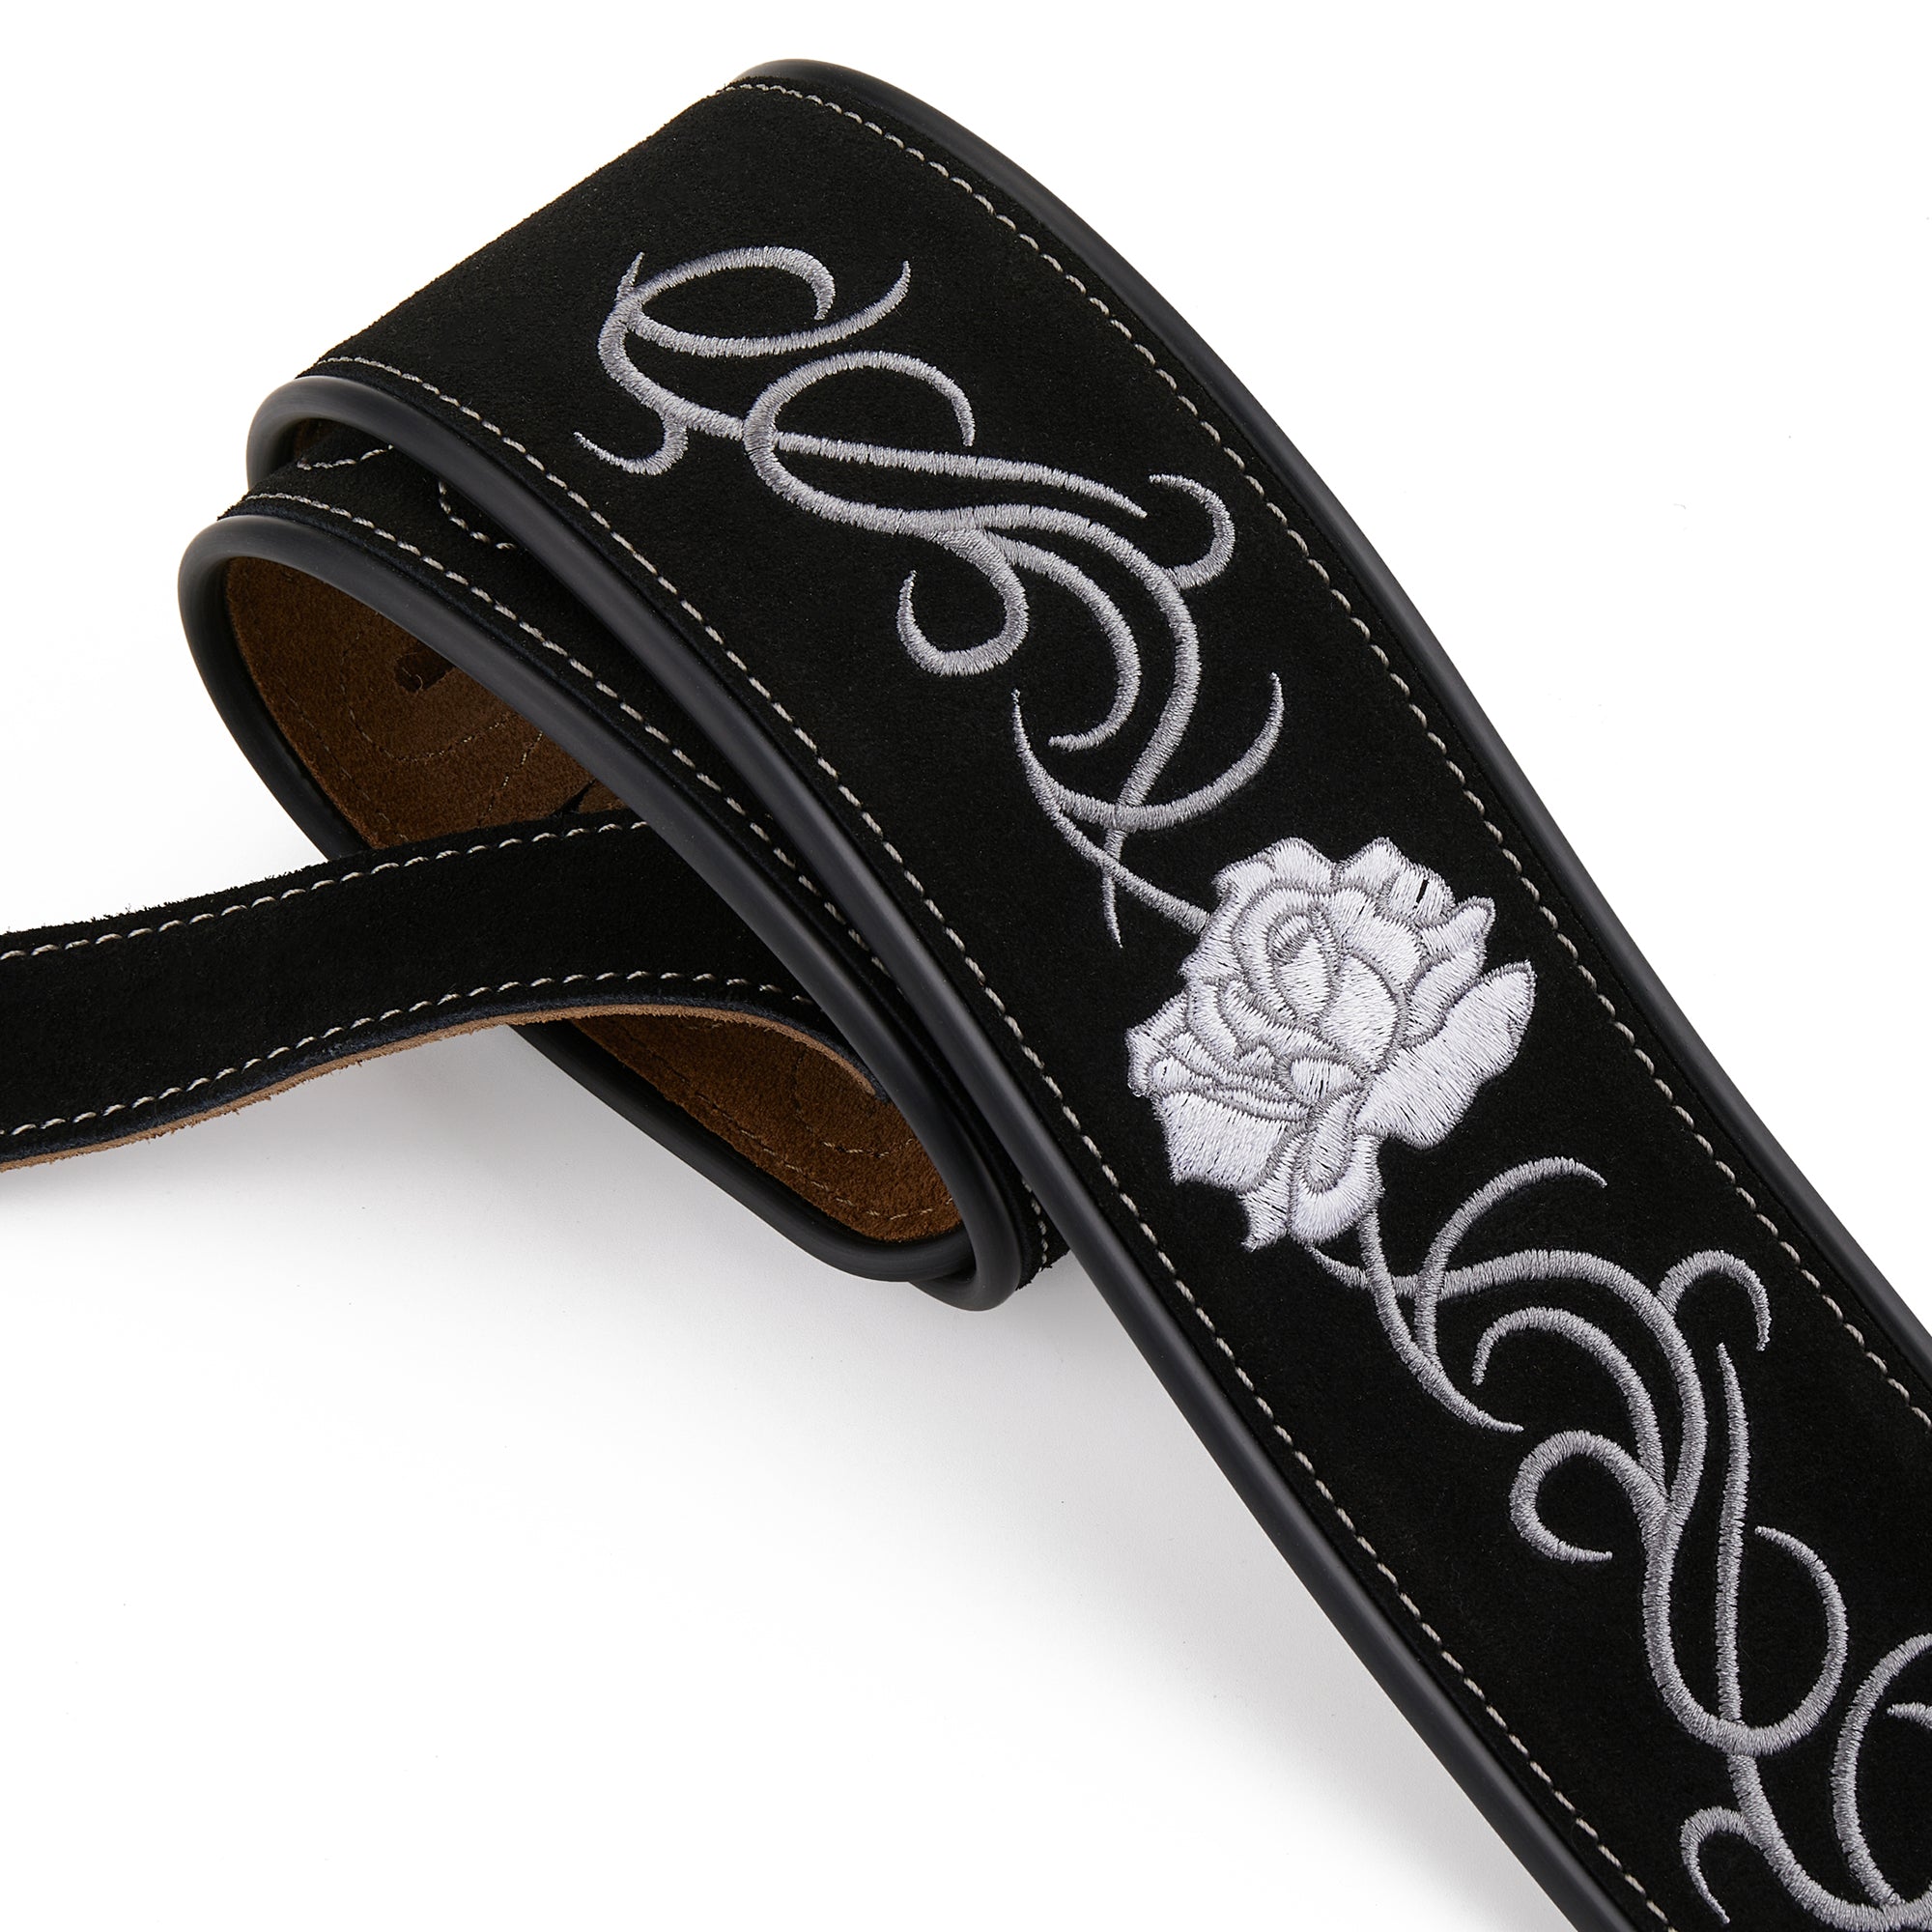 LM Products 2-inch Macrame Cotton Guitar Strap with Leather Ends - Black